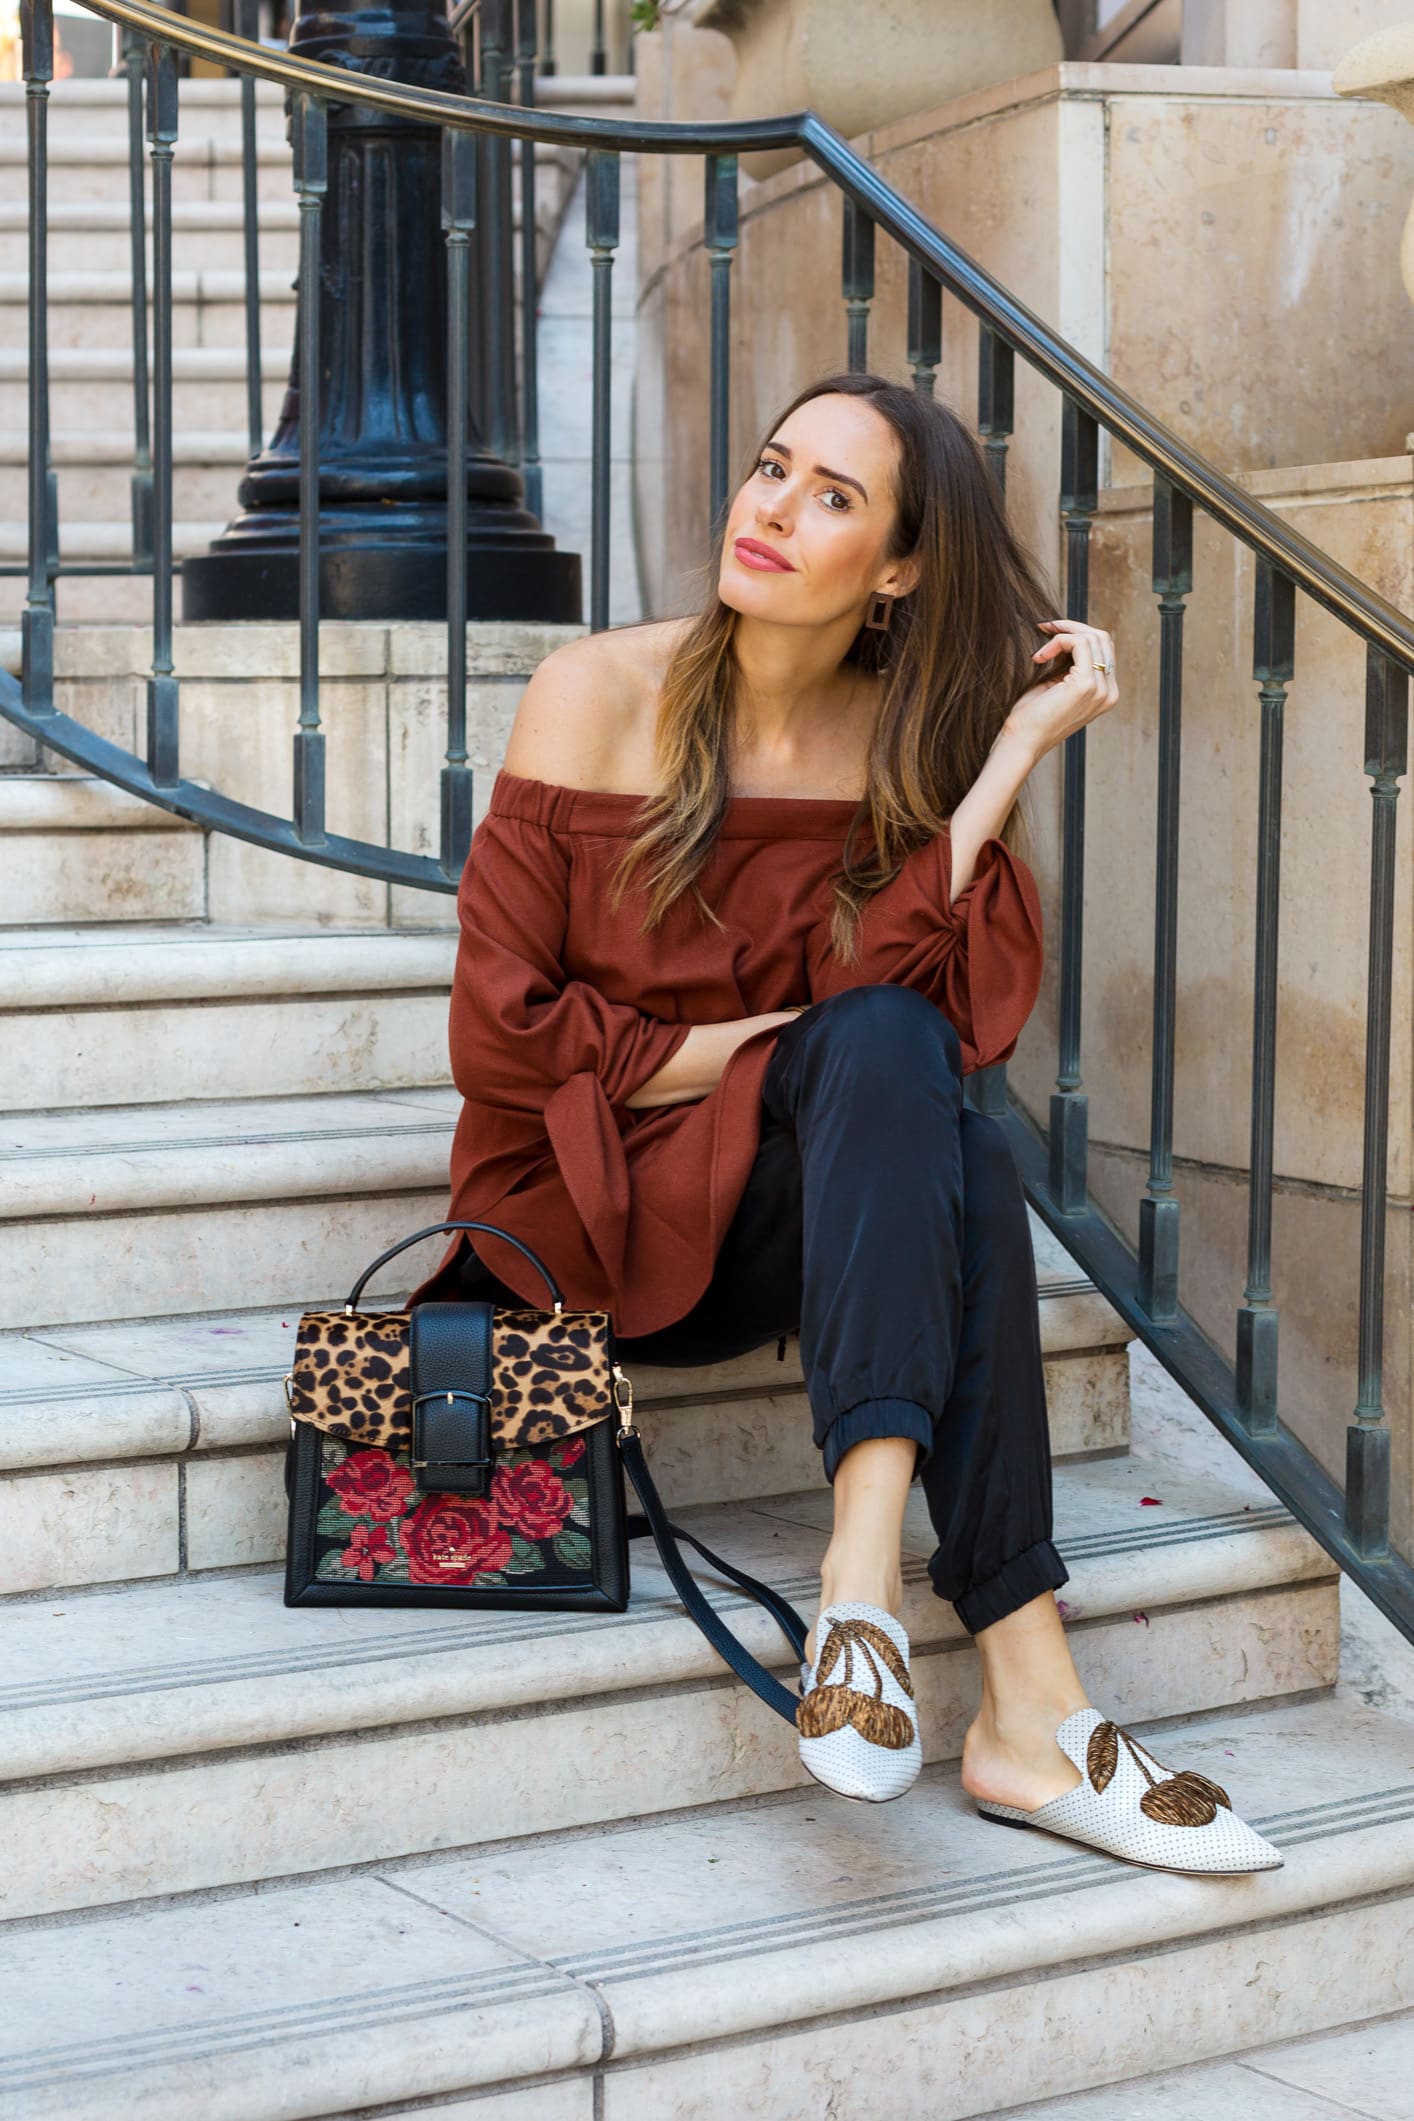 Louise Roe wearing leopard embroidered Kate Spade handbag for Fall